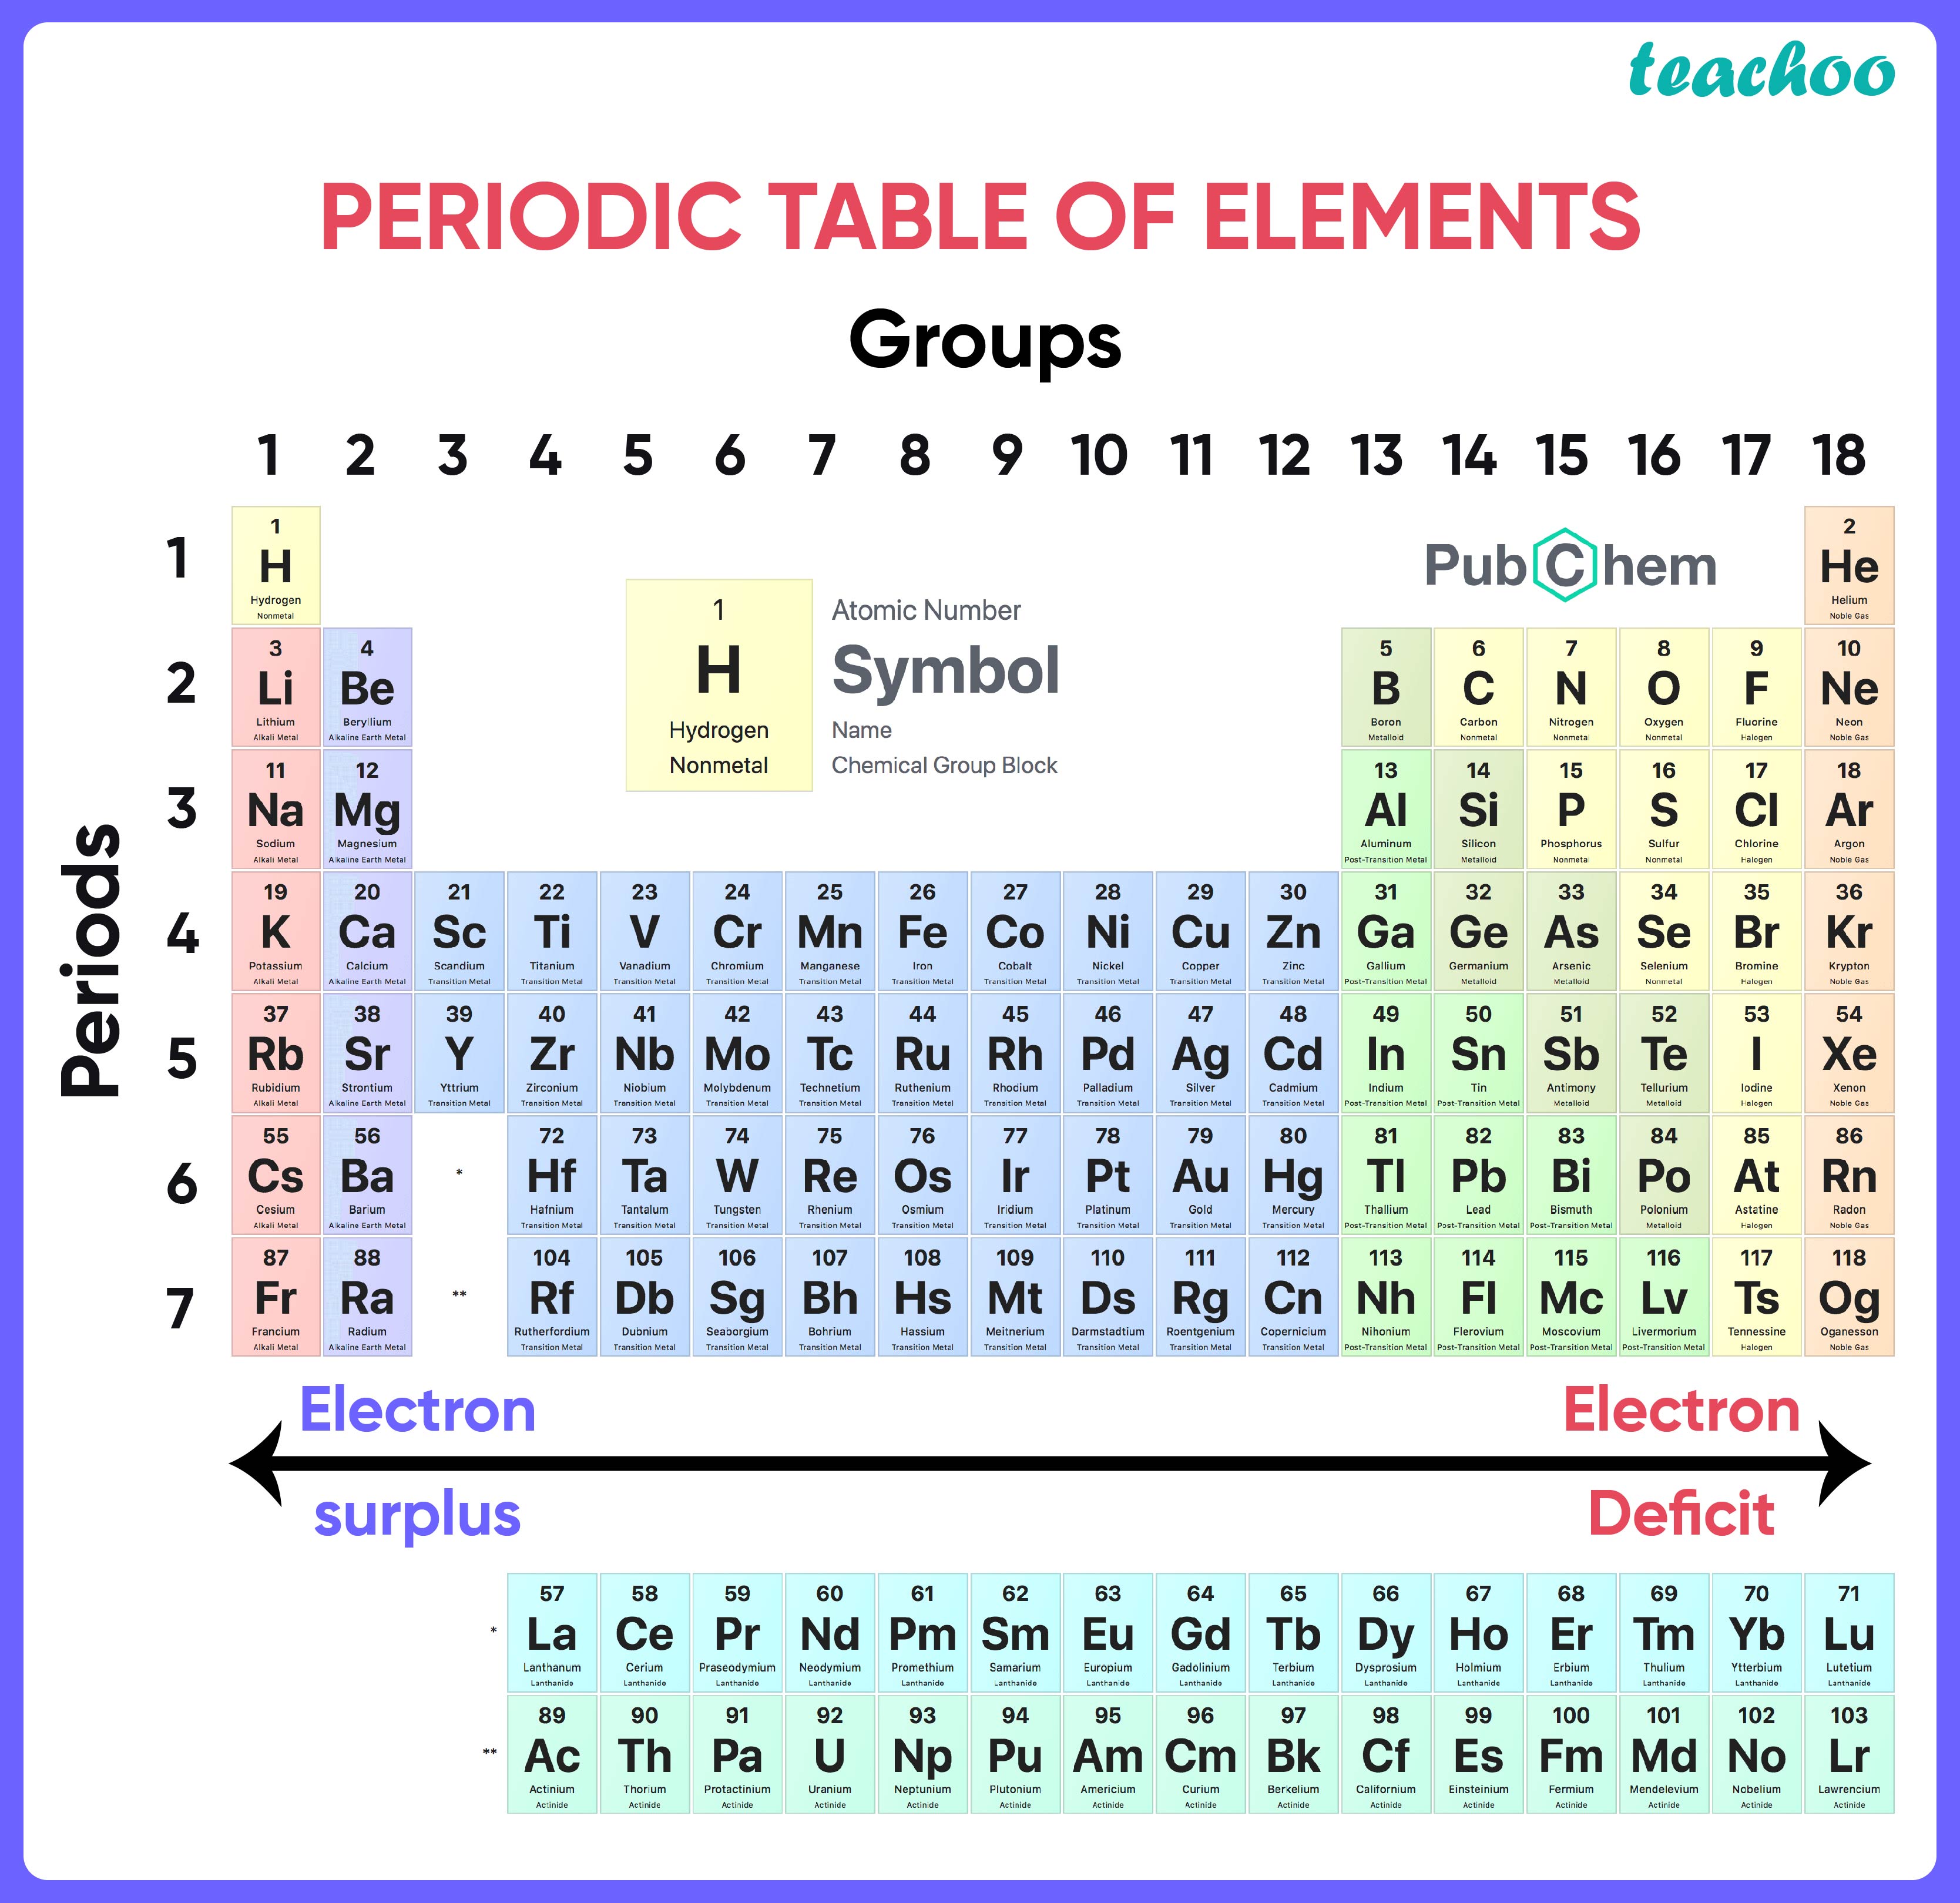 Periodic table of elements-01-01.jpg